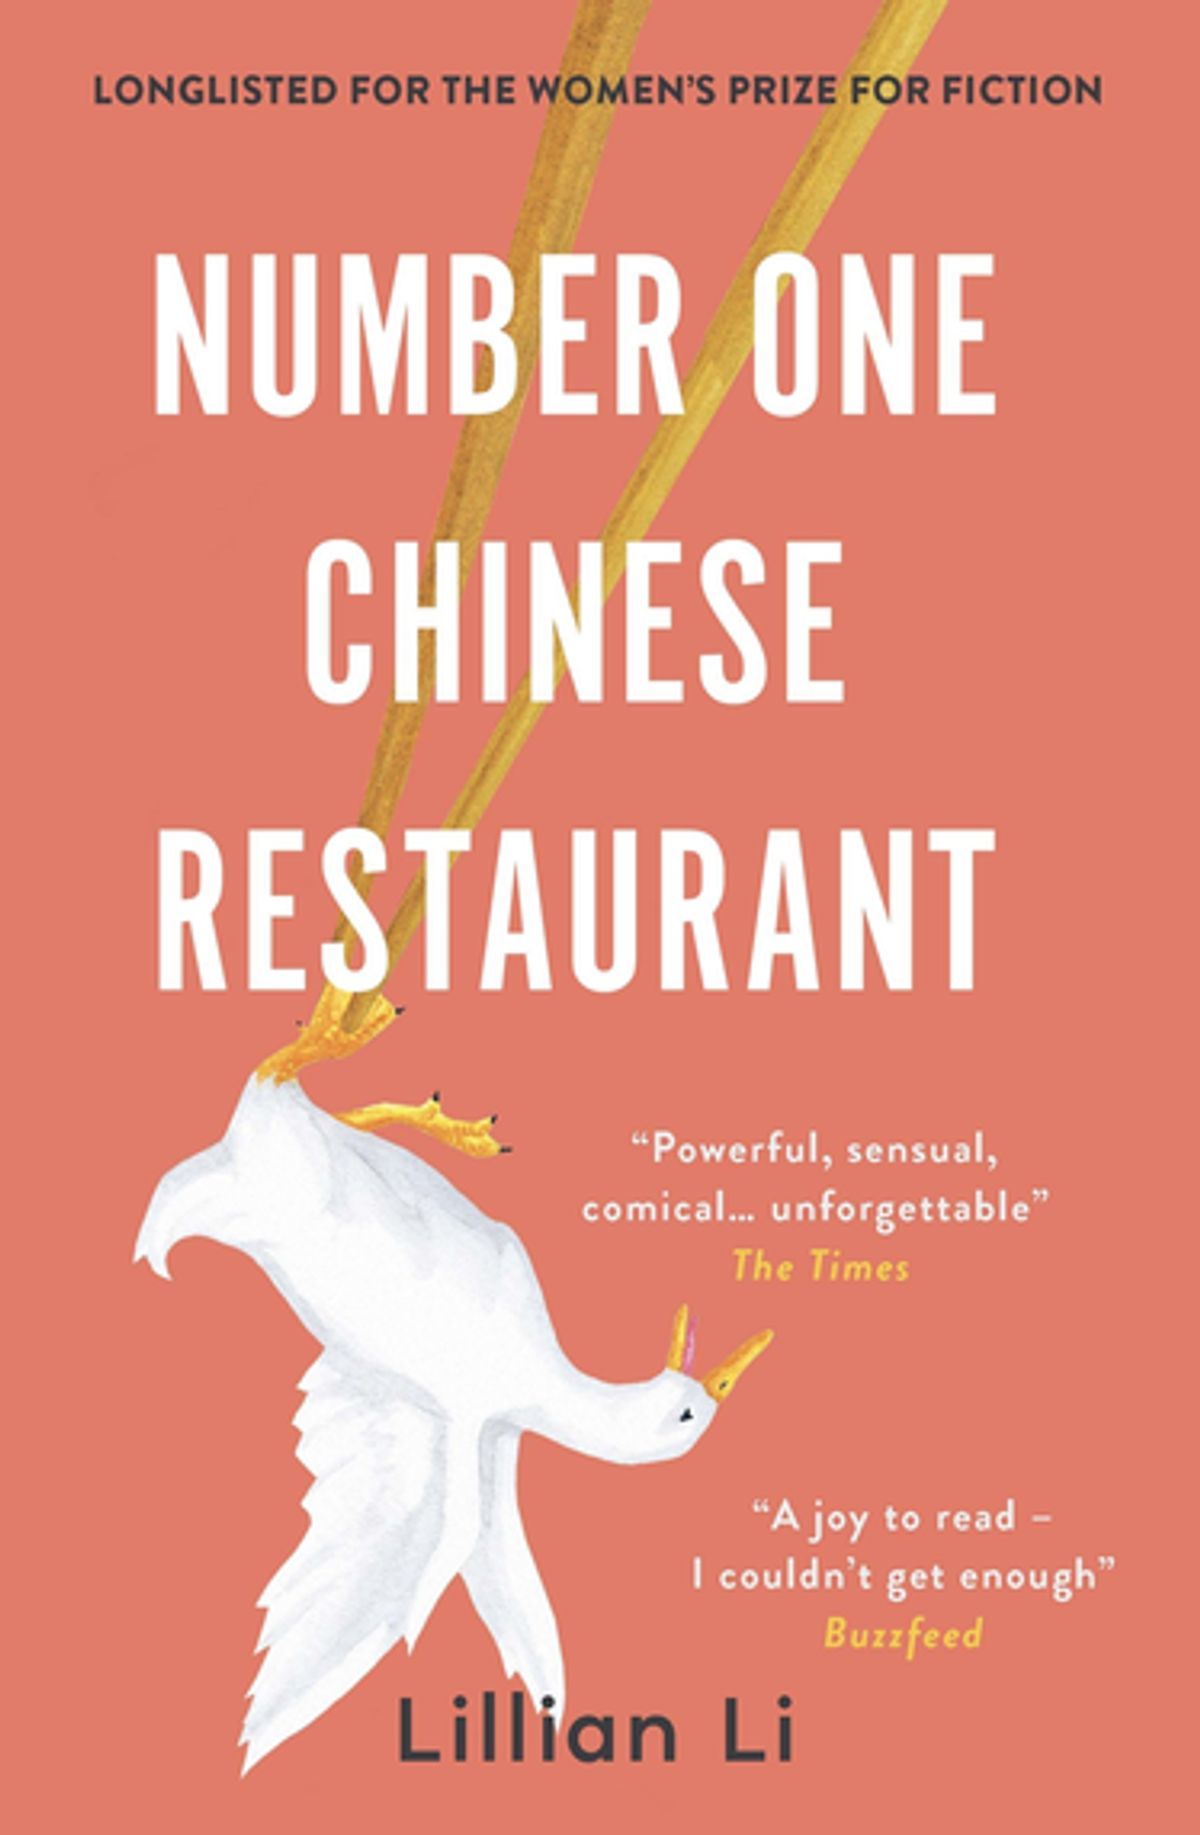 number-one-chinese-restaurant-longlisted-for-the-2019-women-s-prize-for-fiction